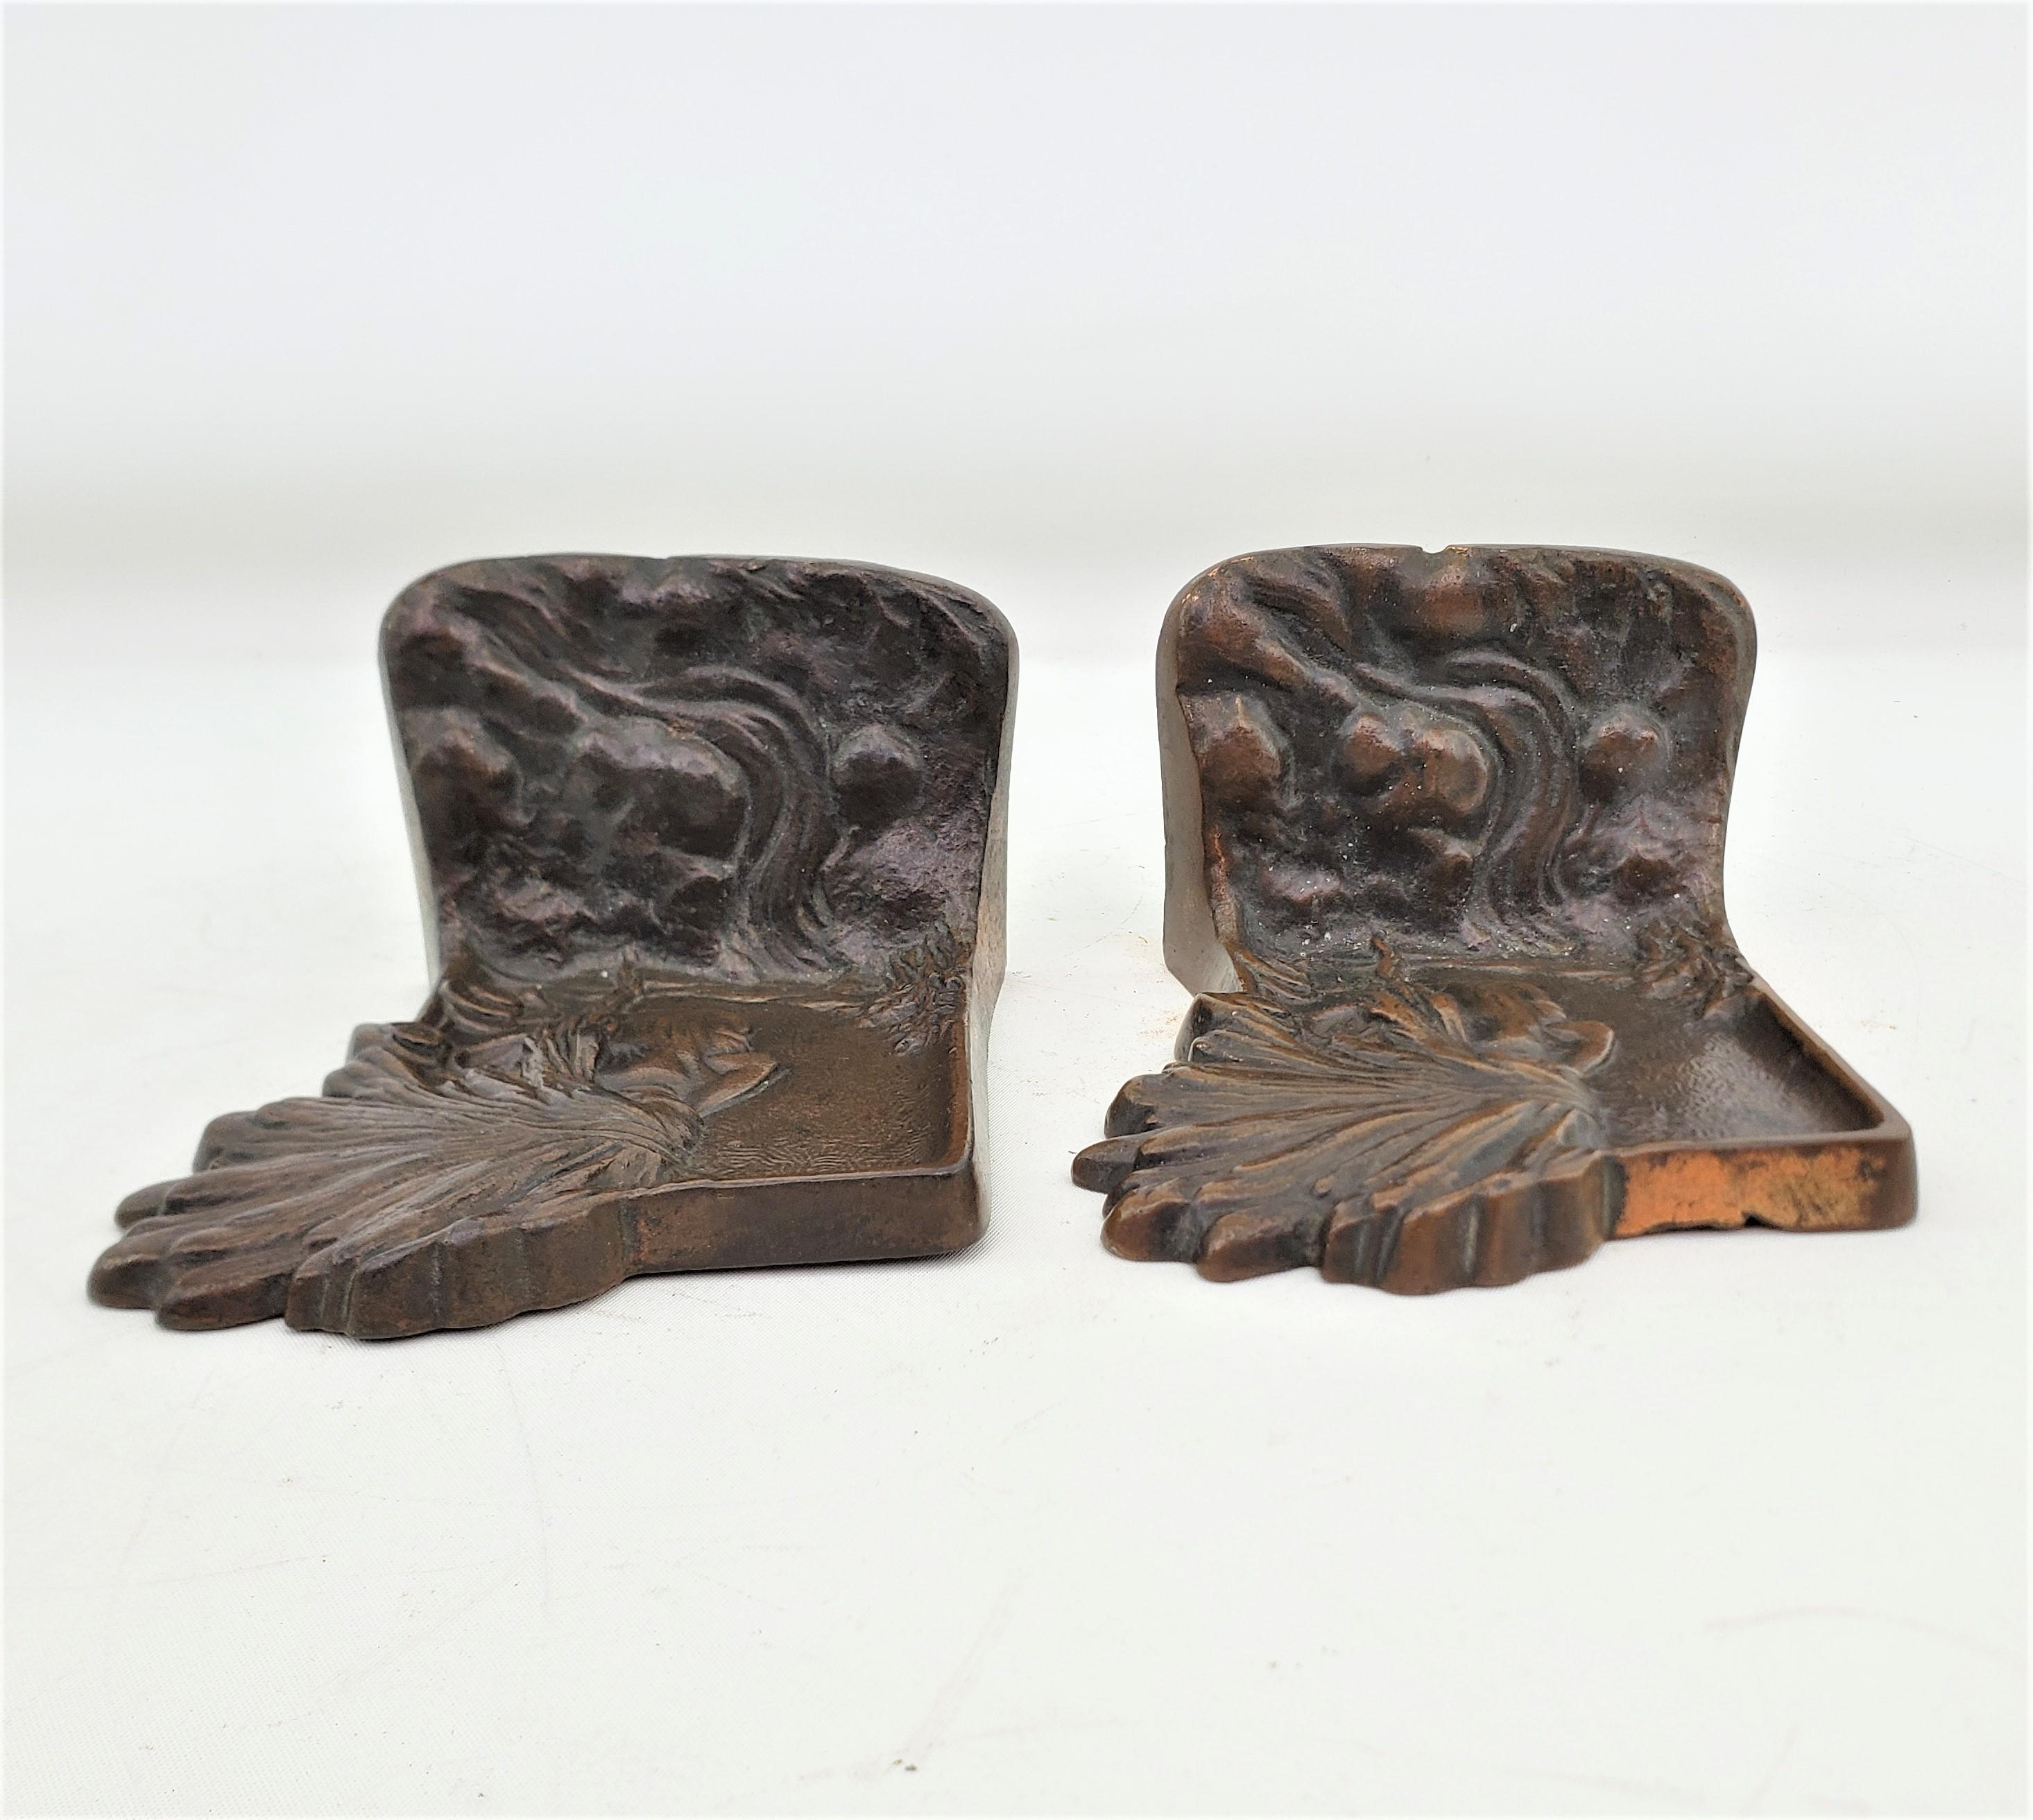 Antique Art Deco Cast & Patinated Bookends Depicting an Indigenous Warrior For Sale 3